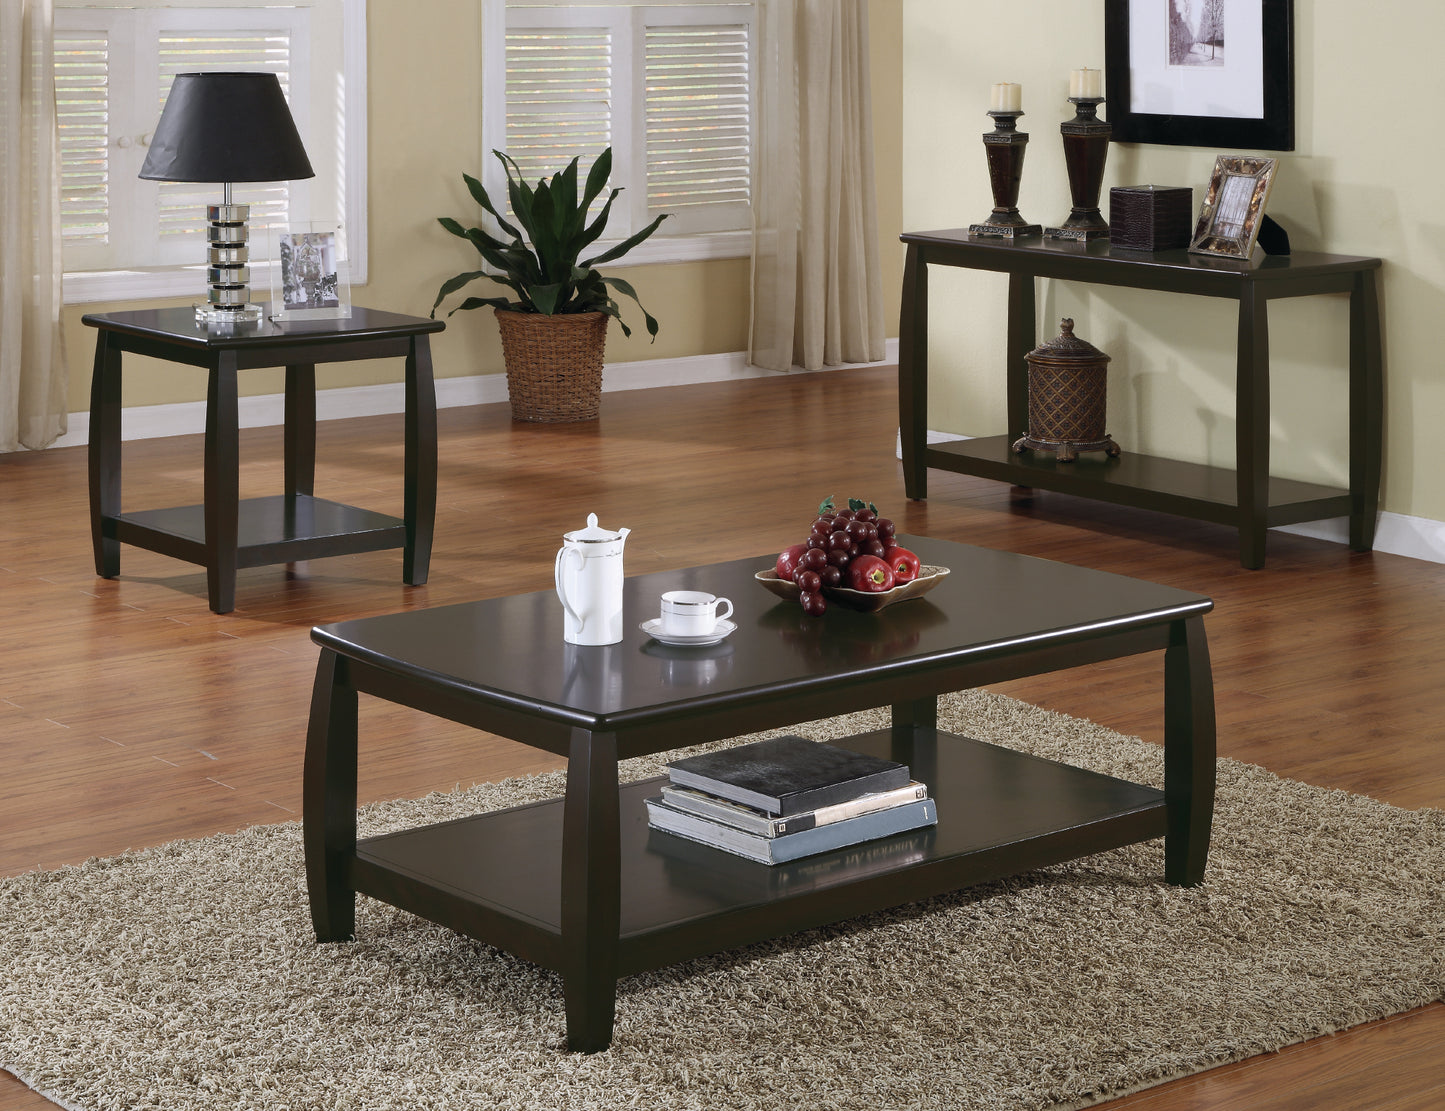 TS7886 - Occasional Table